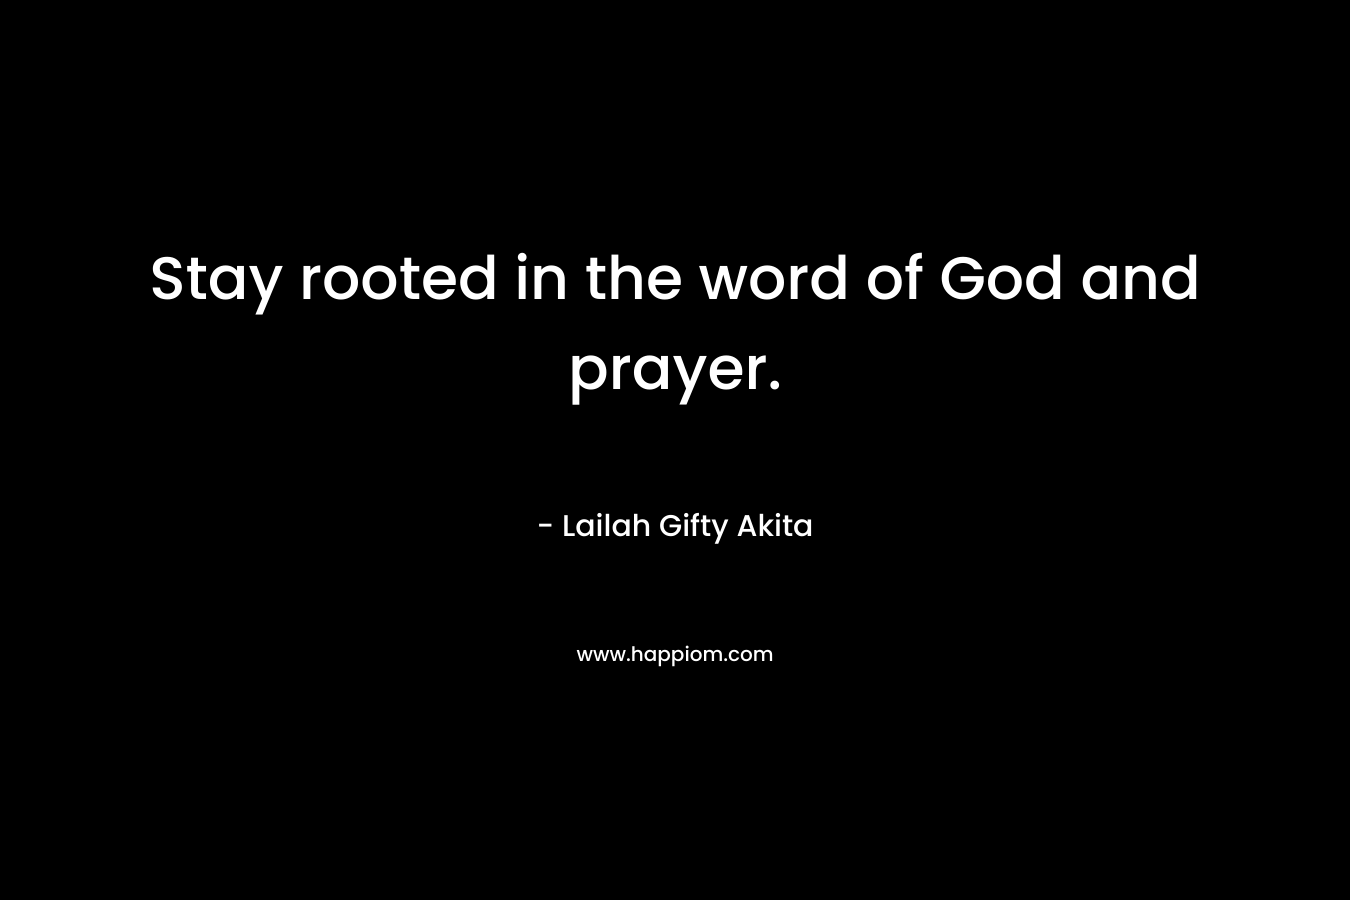 Stay rooted in the word of God and prayer.